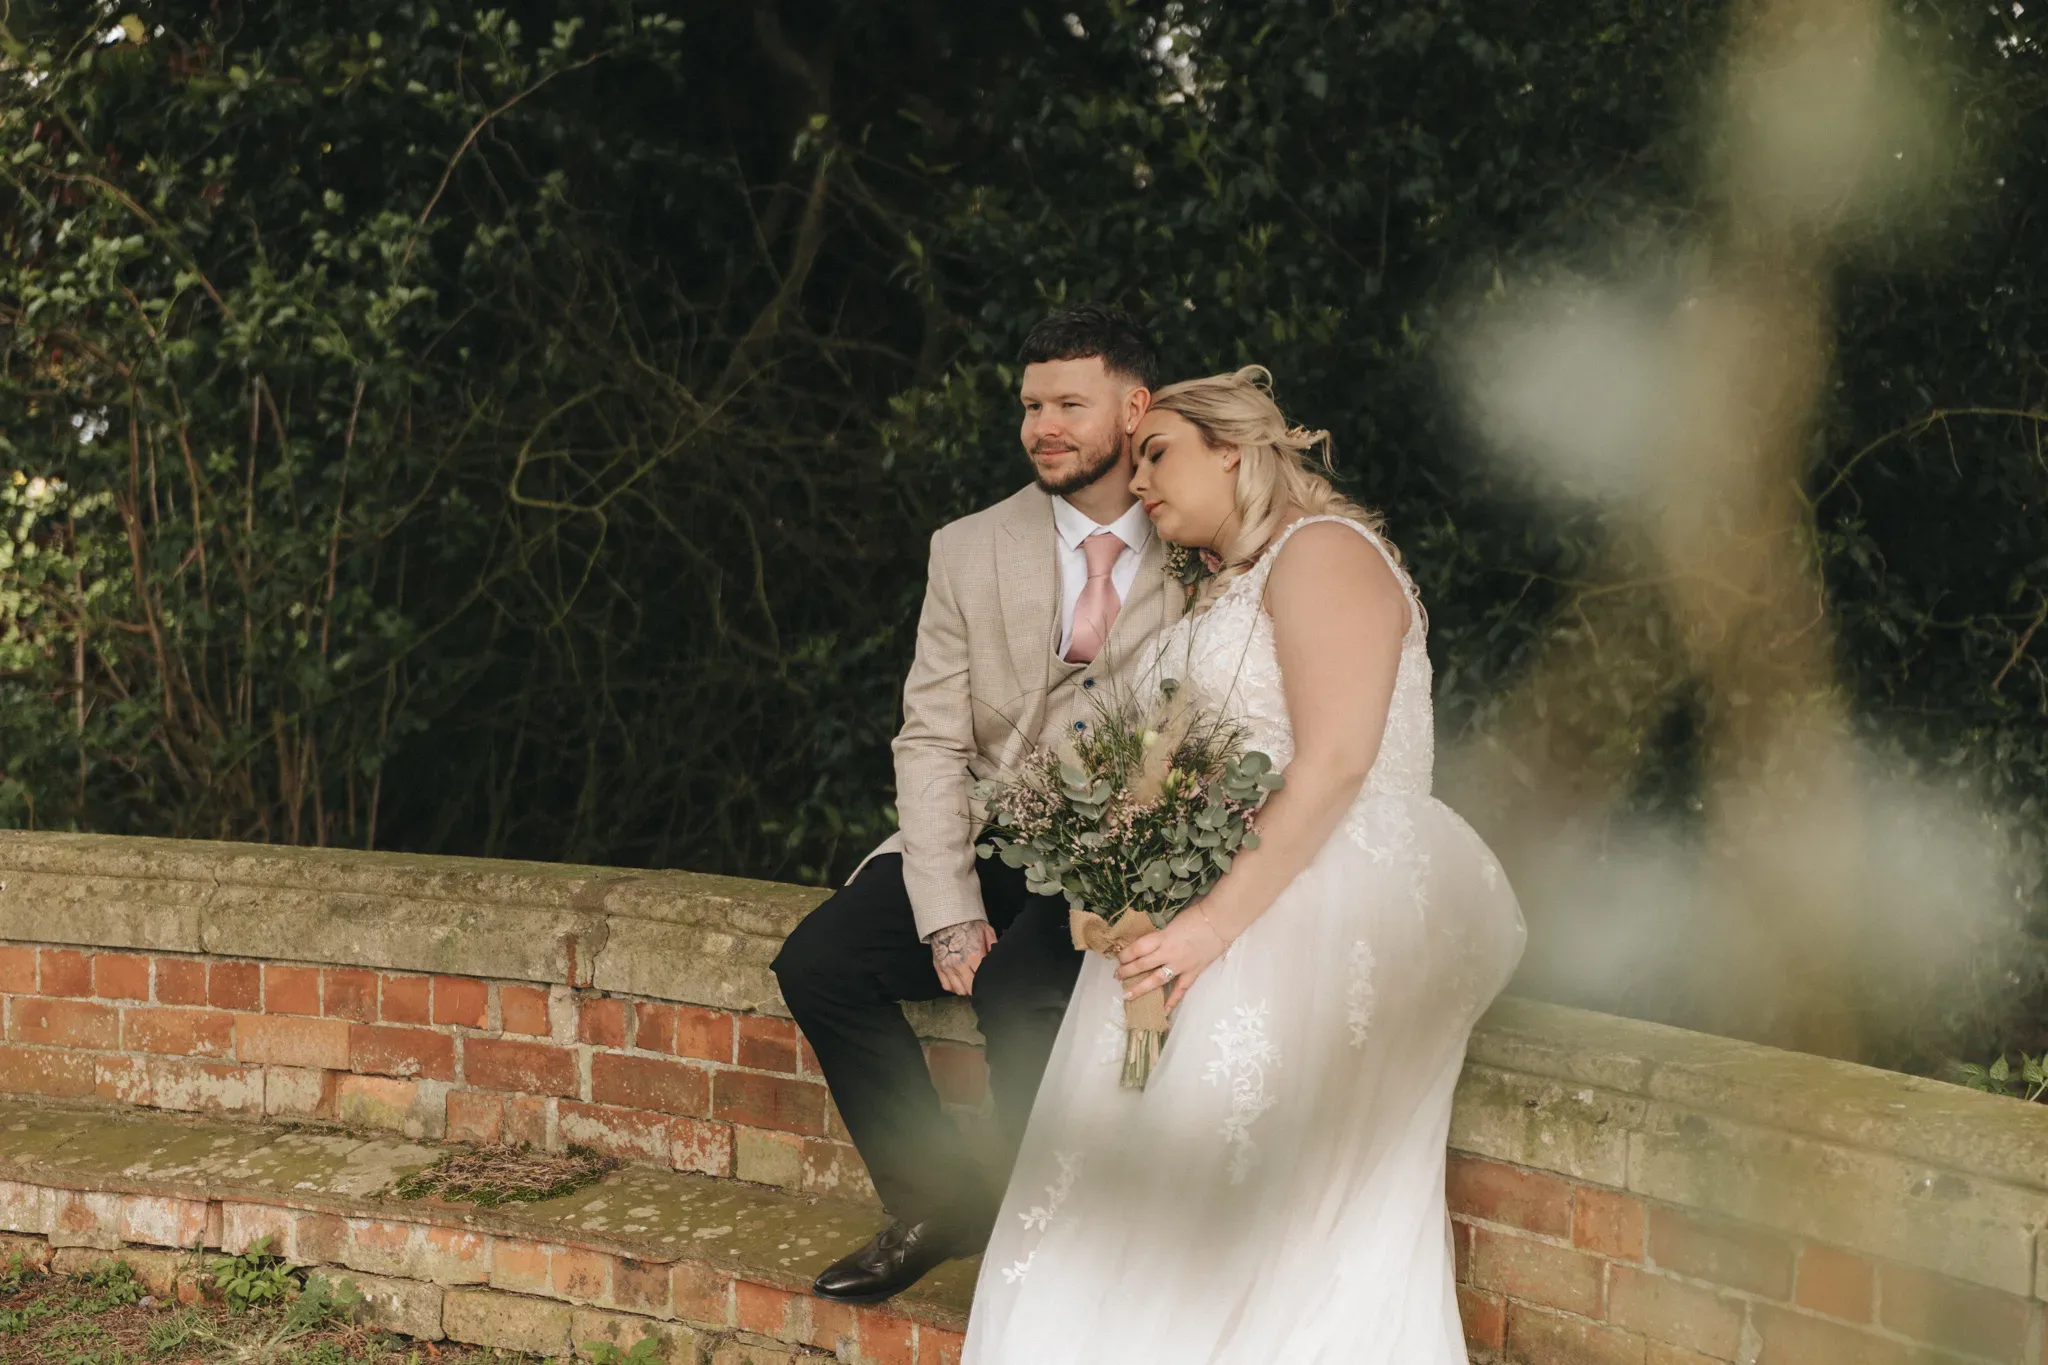 A bride and groom sit on a brick wall in a garden setting, the bride adjusting her dress, holding a bouquet, with the groom looking at her smiling. both wear formal wedding attire. green foliage surrounds them.